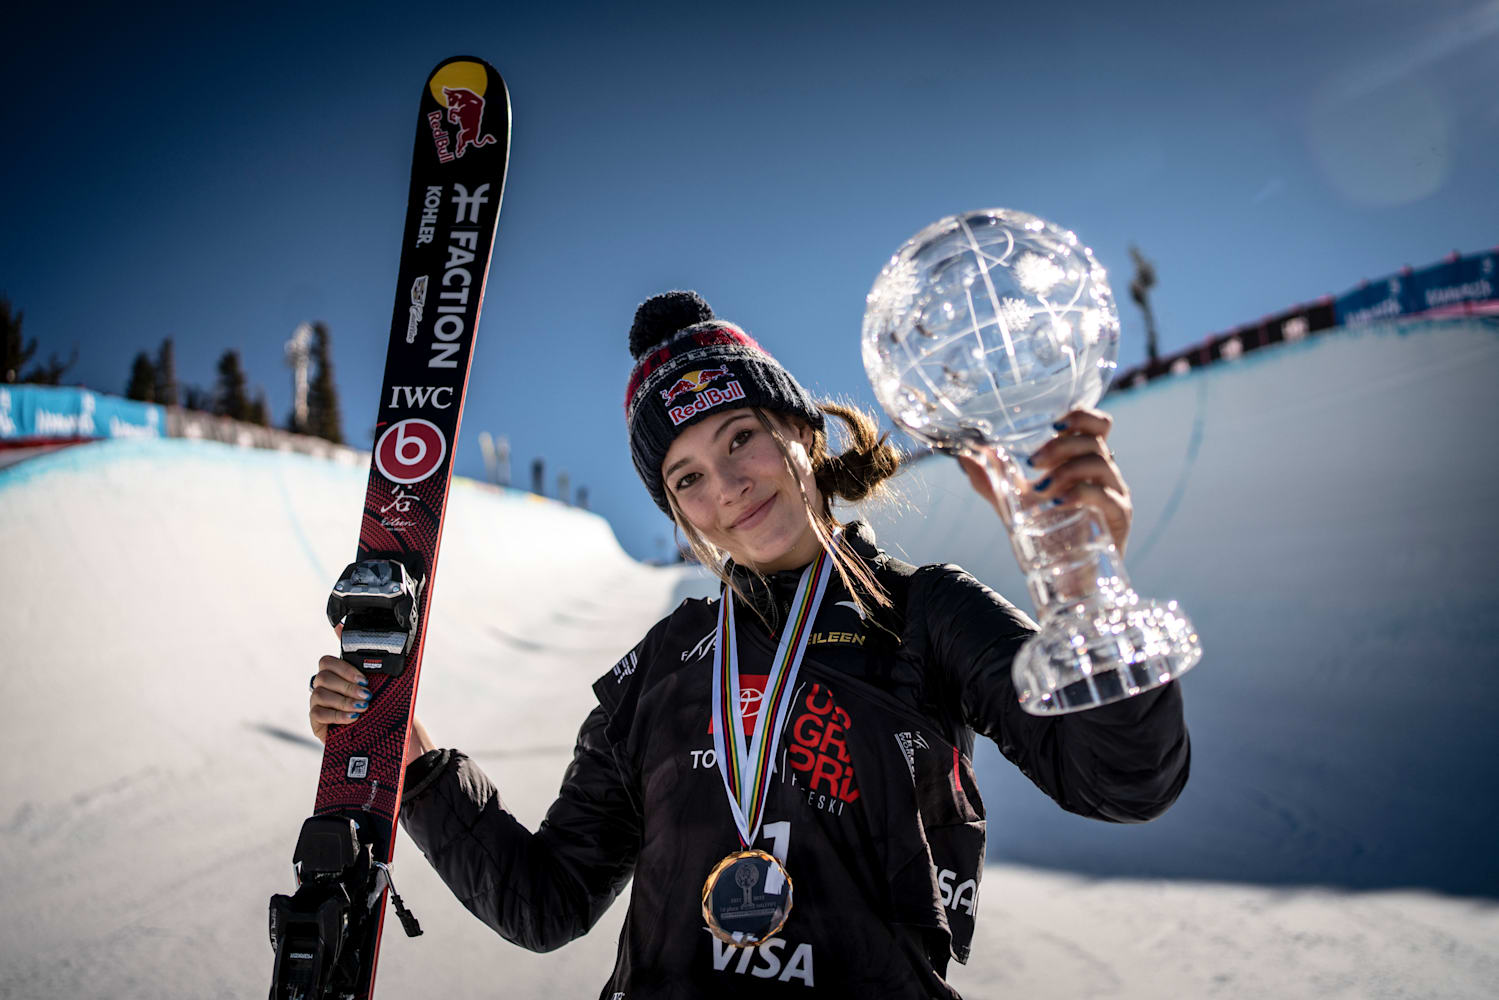 Skiing sensation Eileen Gu switched from US to China and is now